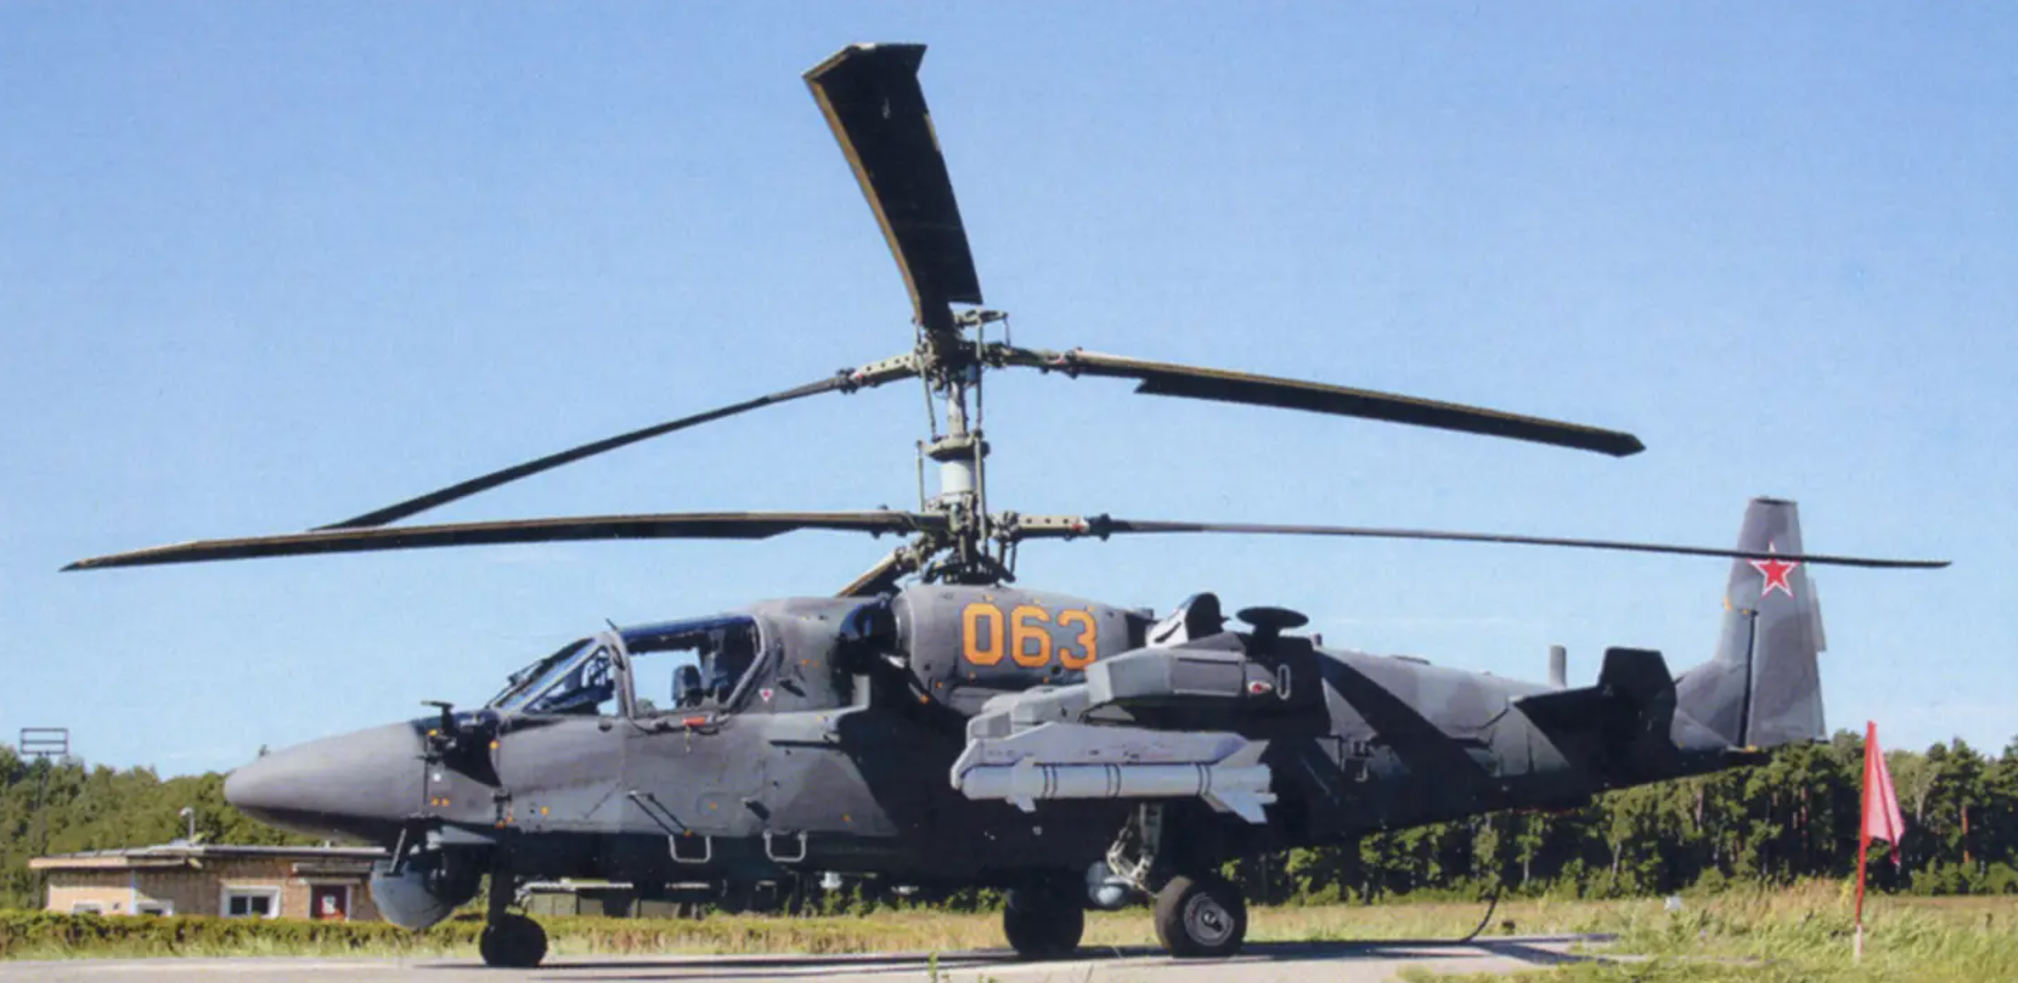 a-ka-52-test-helicopter-carries-a-lmur-missile-russian-helicopters.jpg